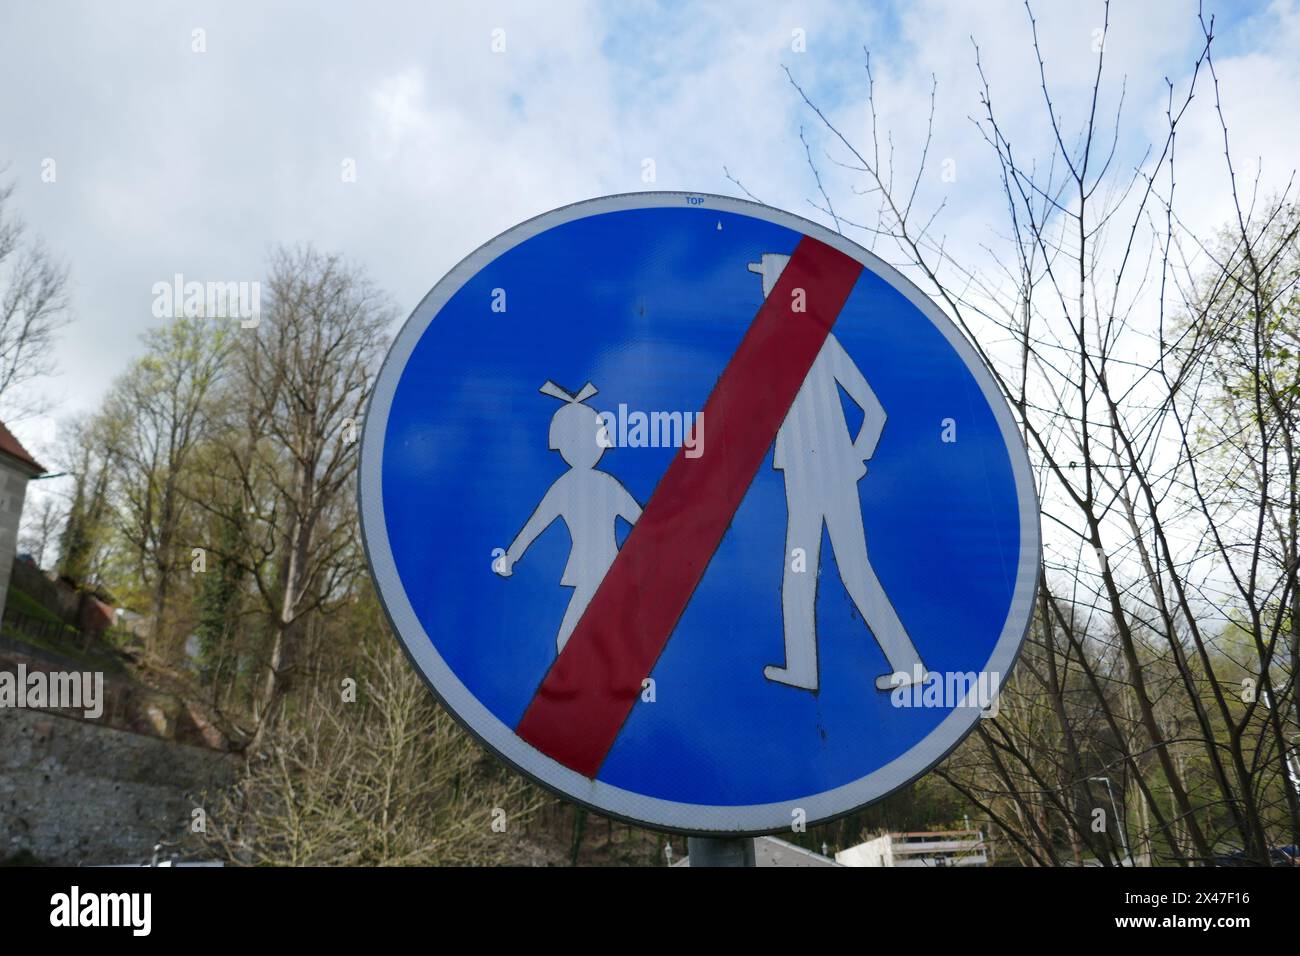 No pedestrian sign in Europe with adult and child walking icons Stock Photo